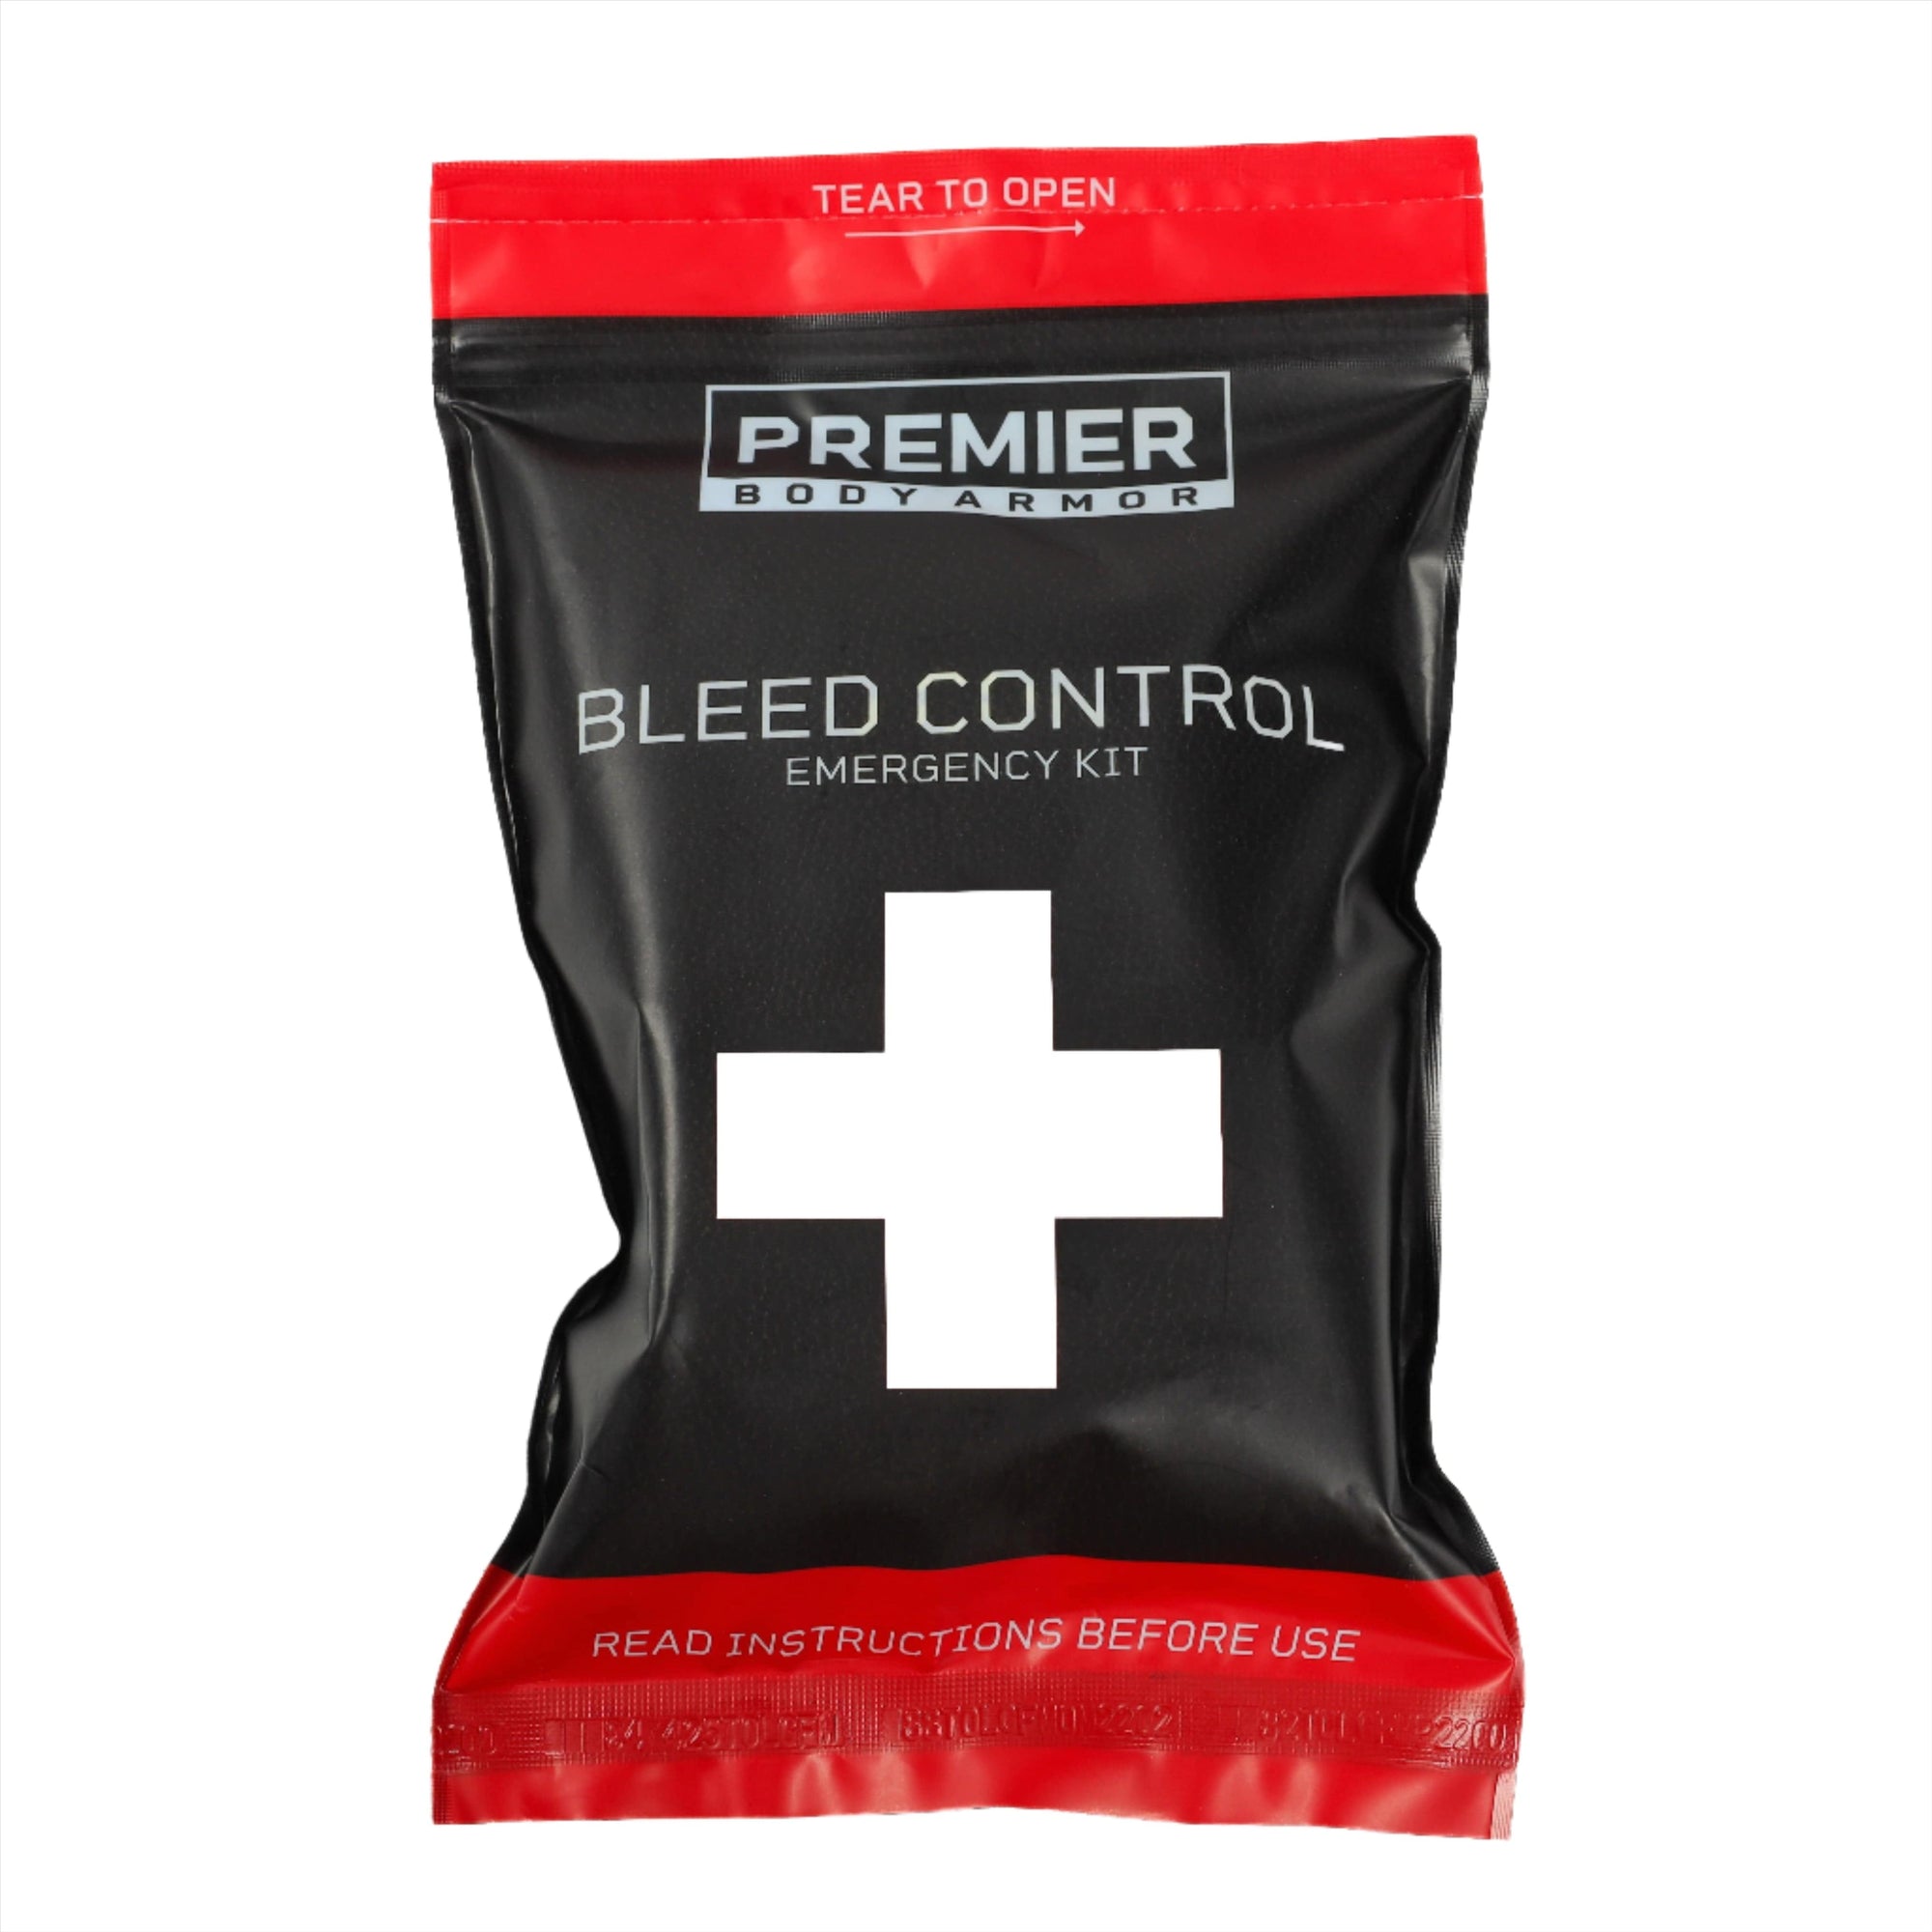 The PBA bleed control kit is essential for any bug out bag, prepper gear, or emergency kits!